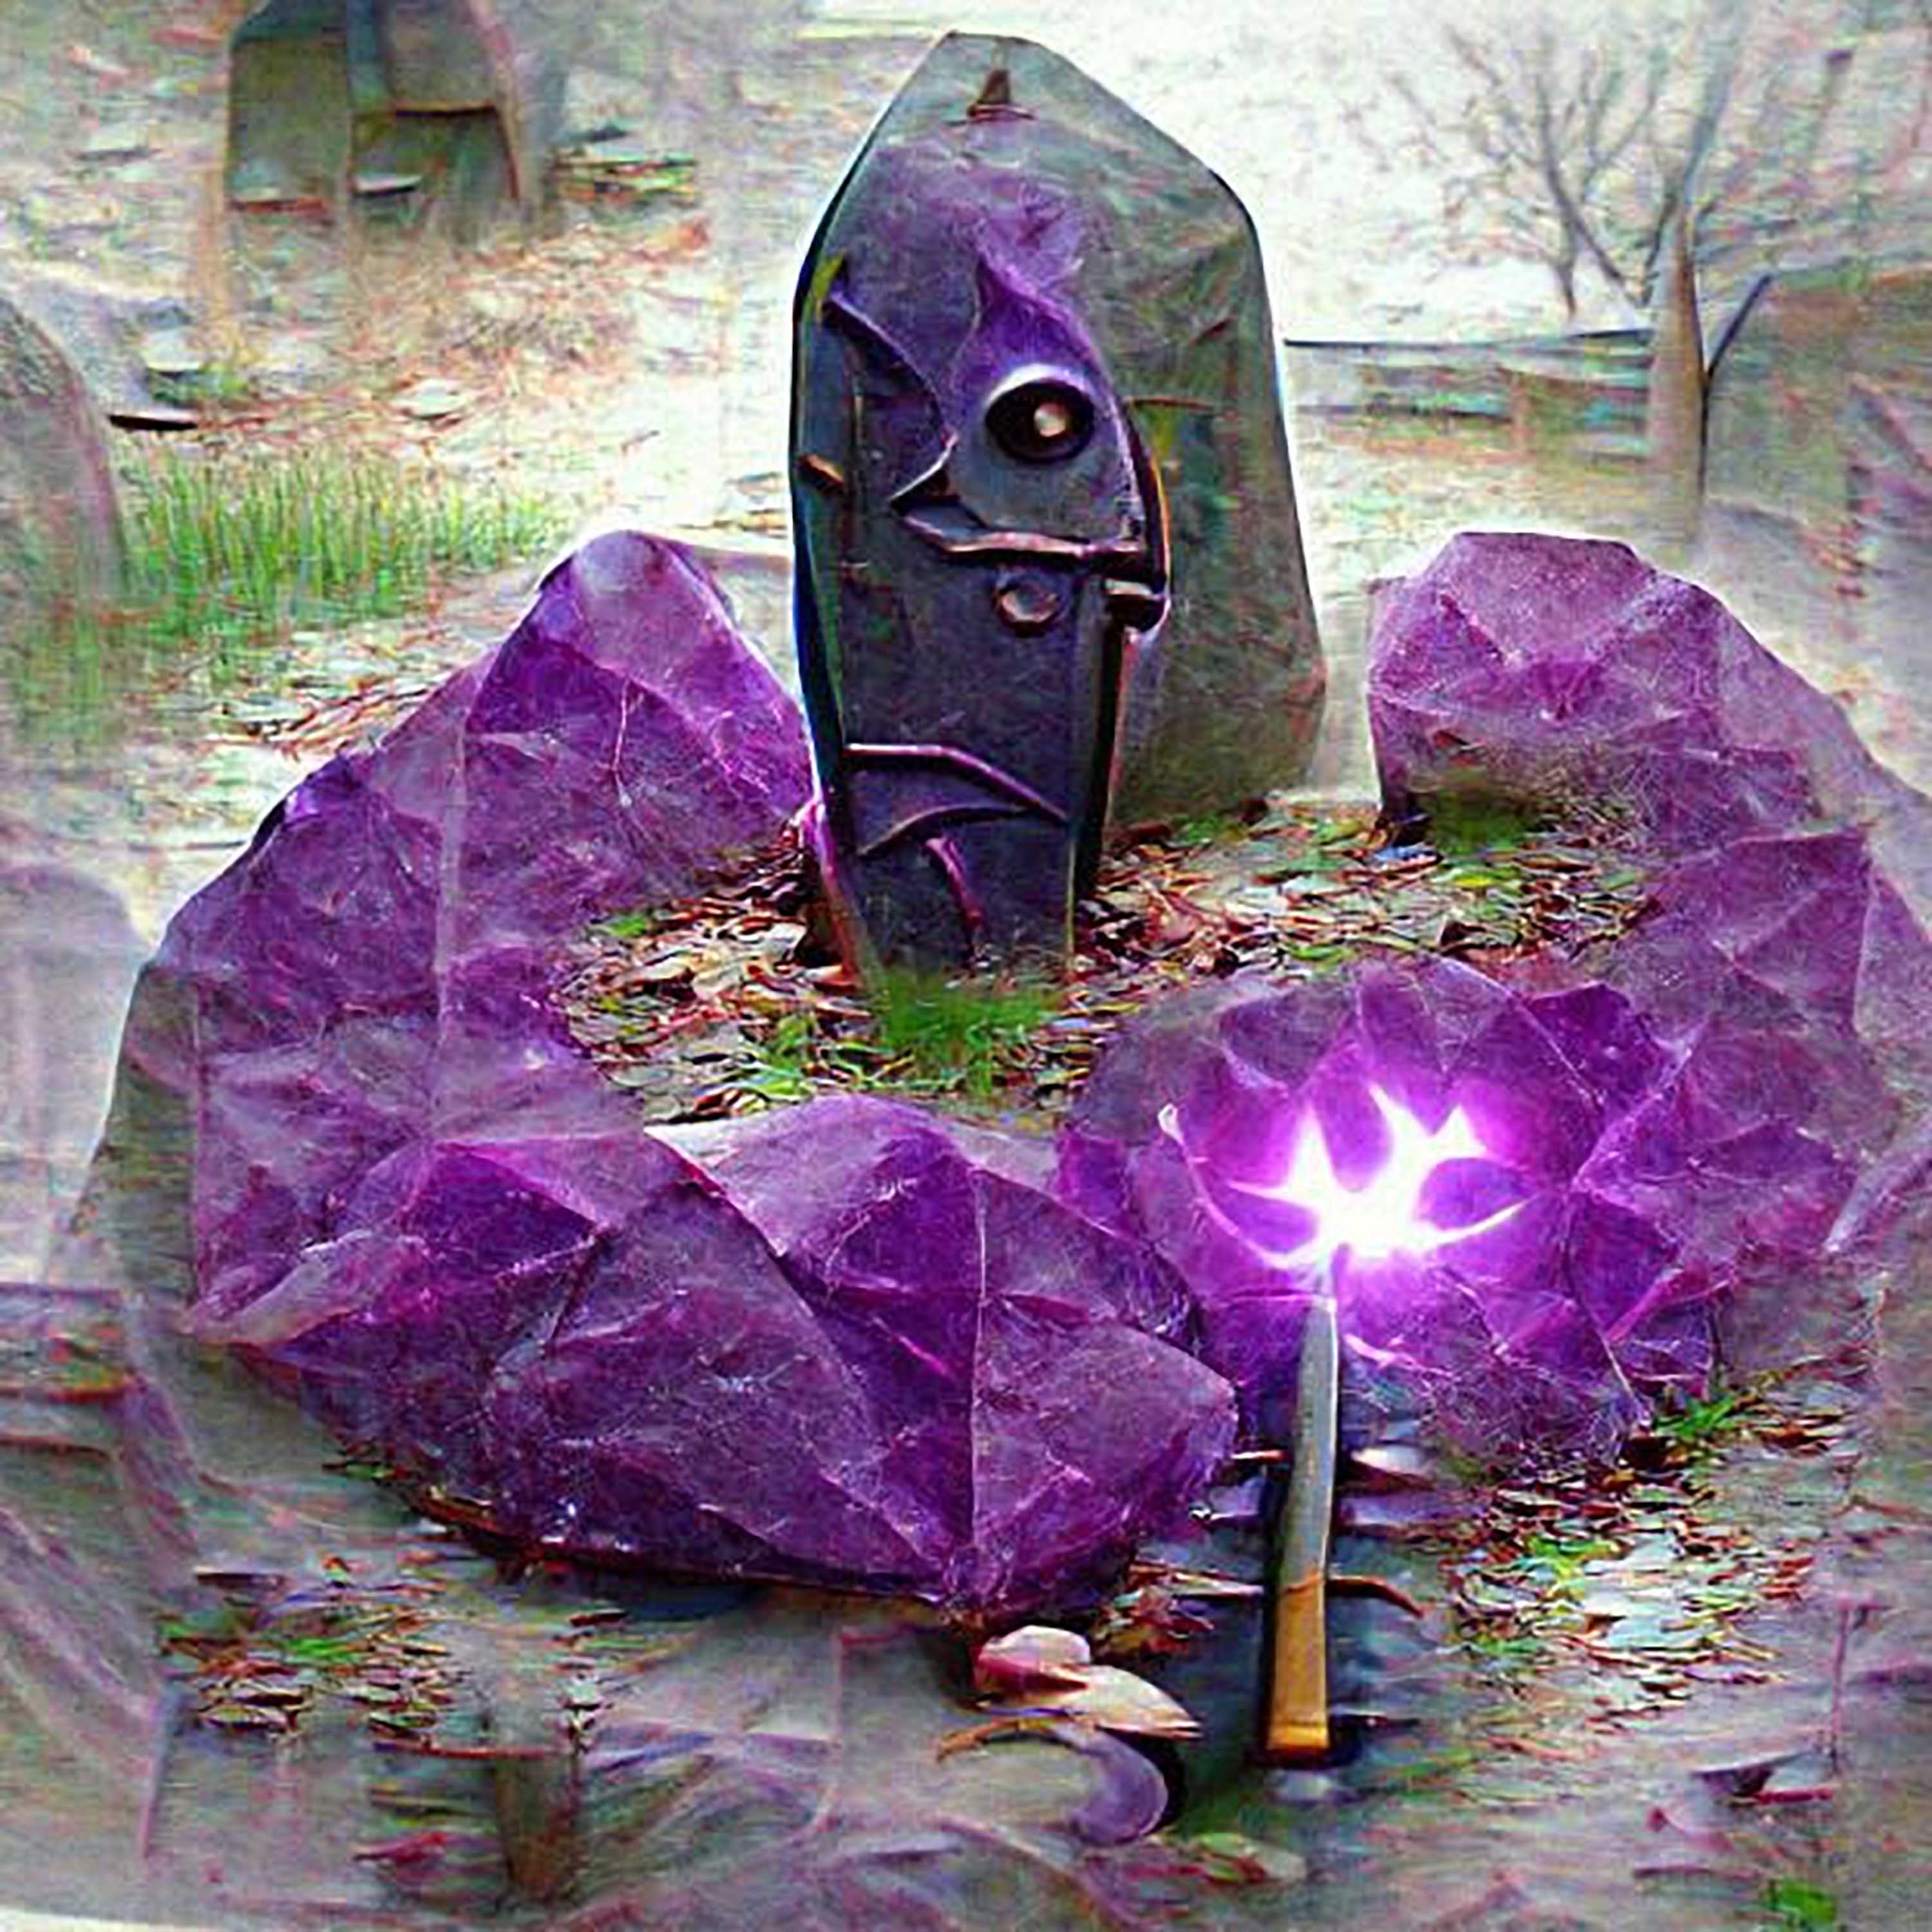 #107 - "purple Necromancer, no kidding, returned to the land of the living enlightened by the insight given by my Eye Wadjet, Ancient Stone stored my Sword"